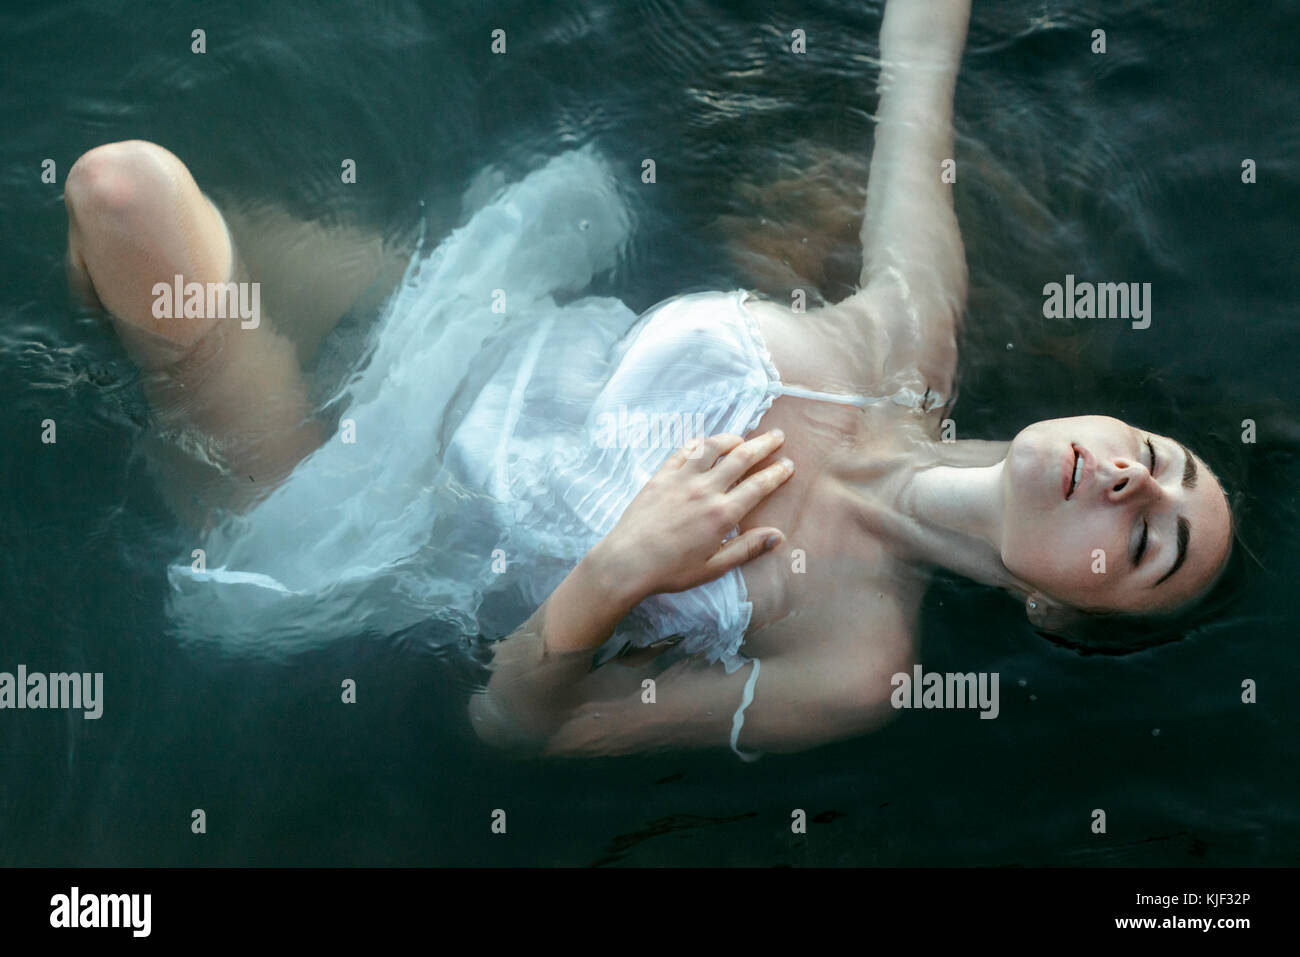 Caucasian woman wearing a dress floating in water Banque D'Images